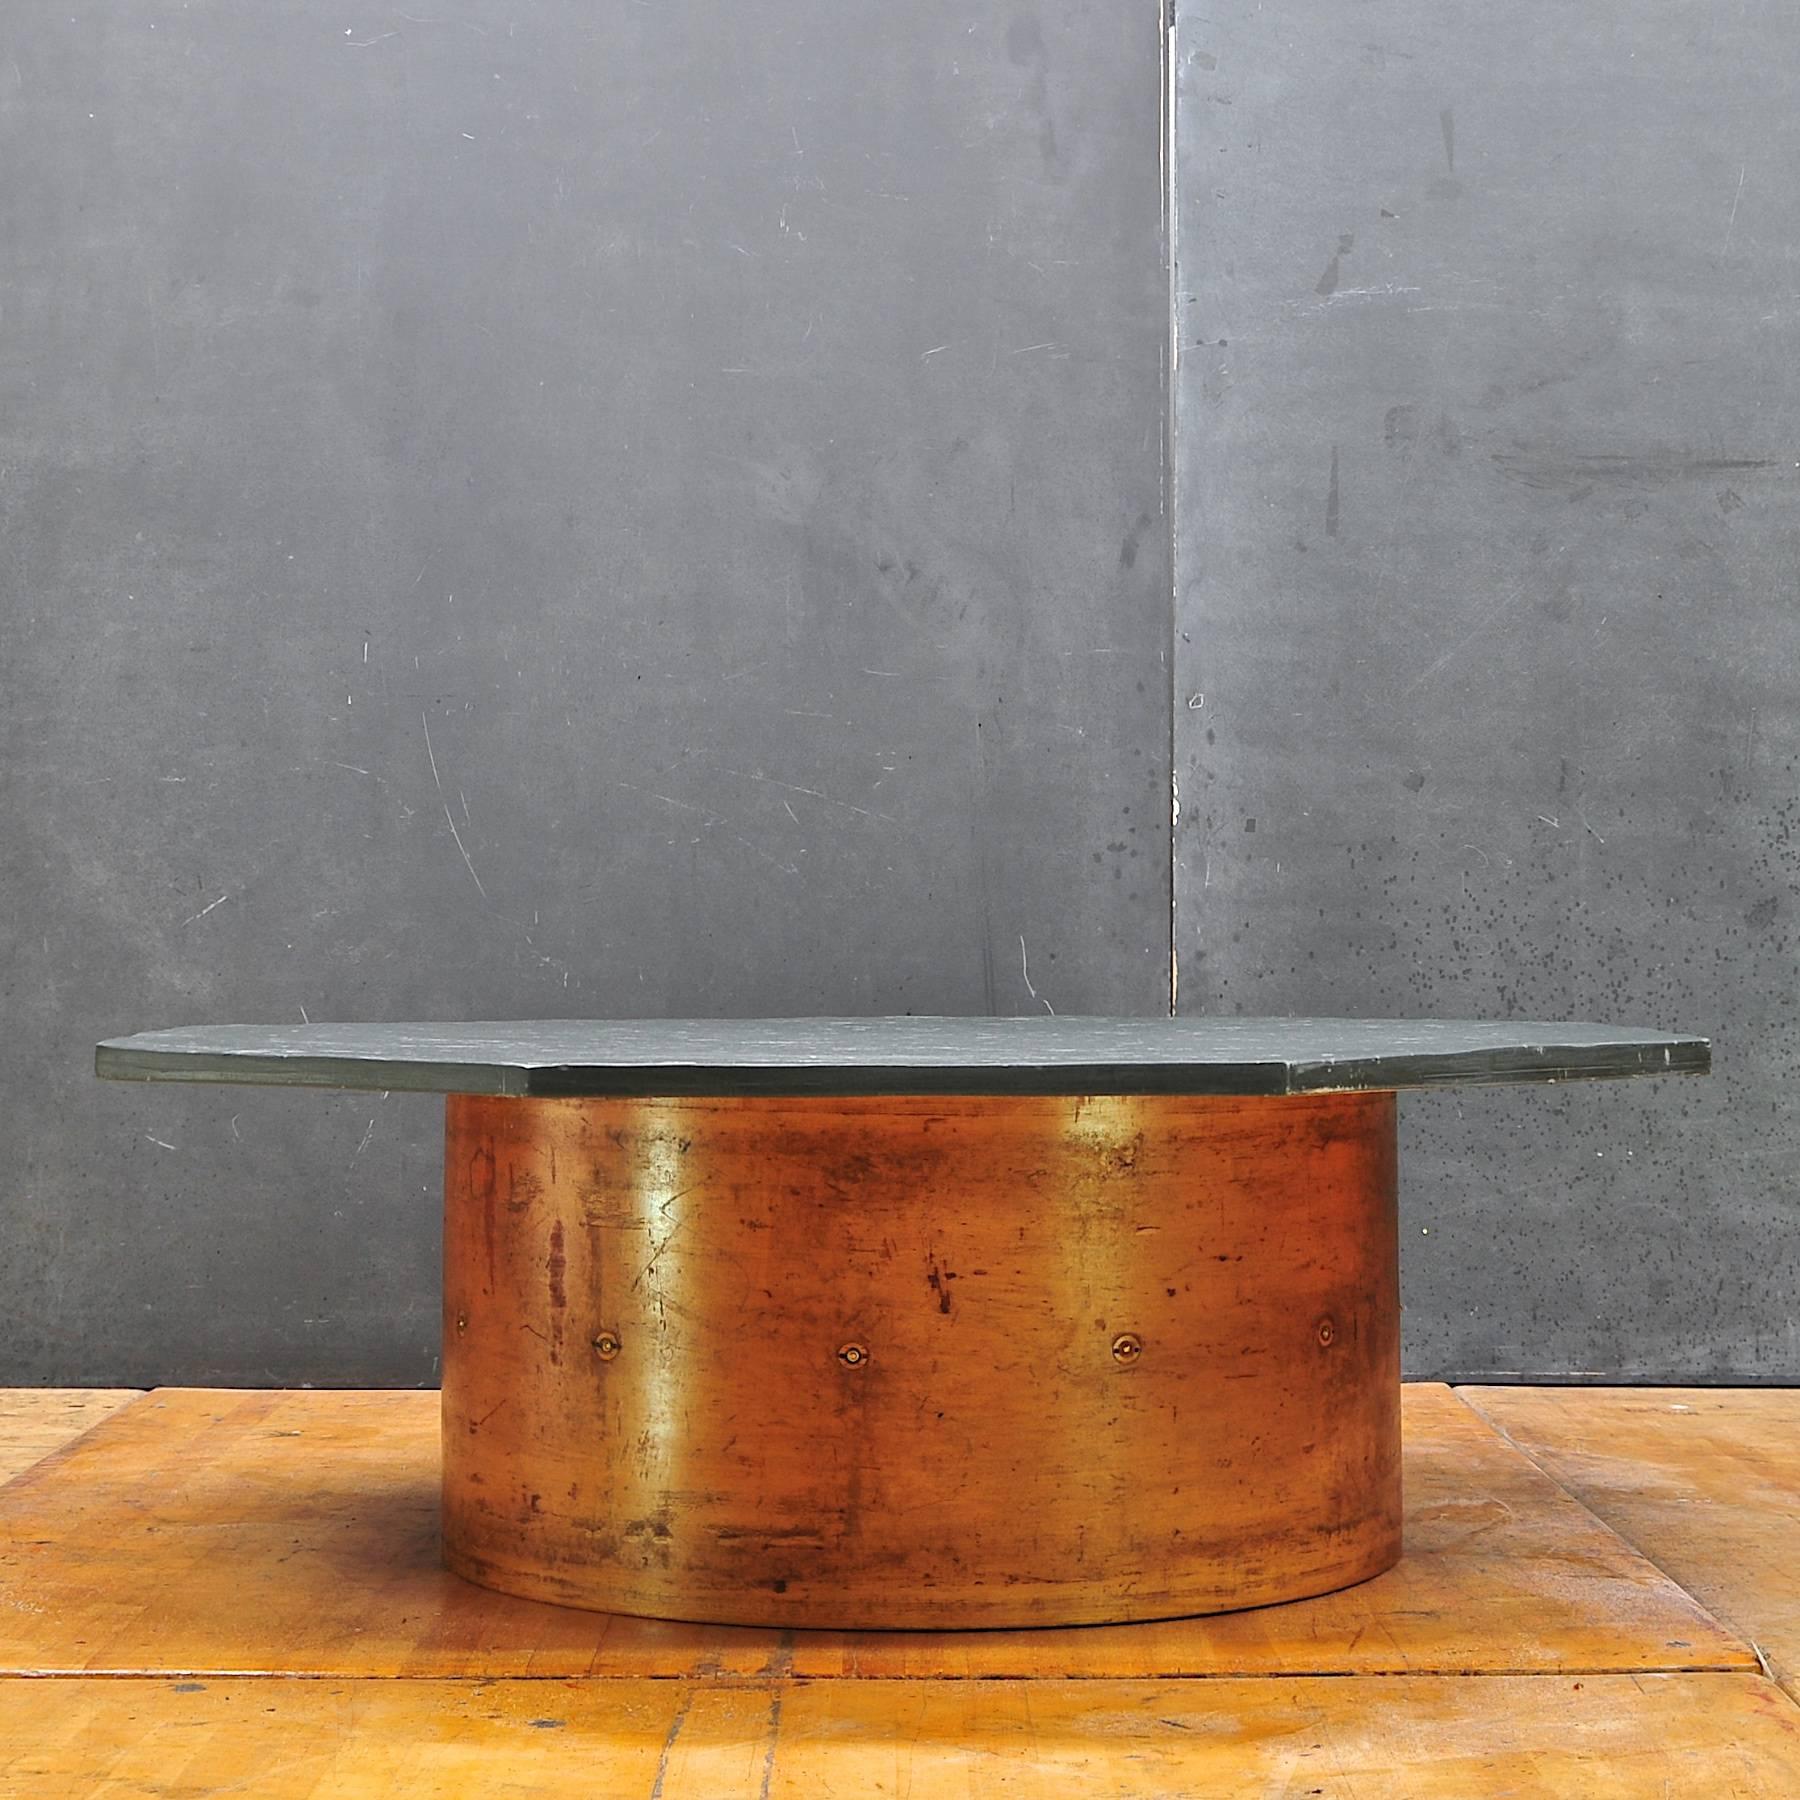 Solid textured slate surface on copper toned maple cylinder with brass detailings.